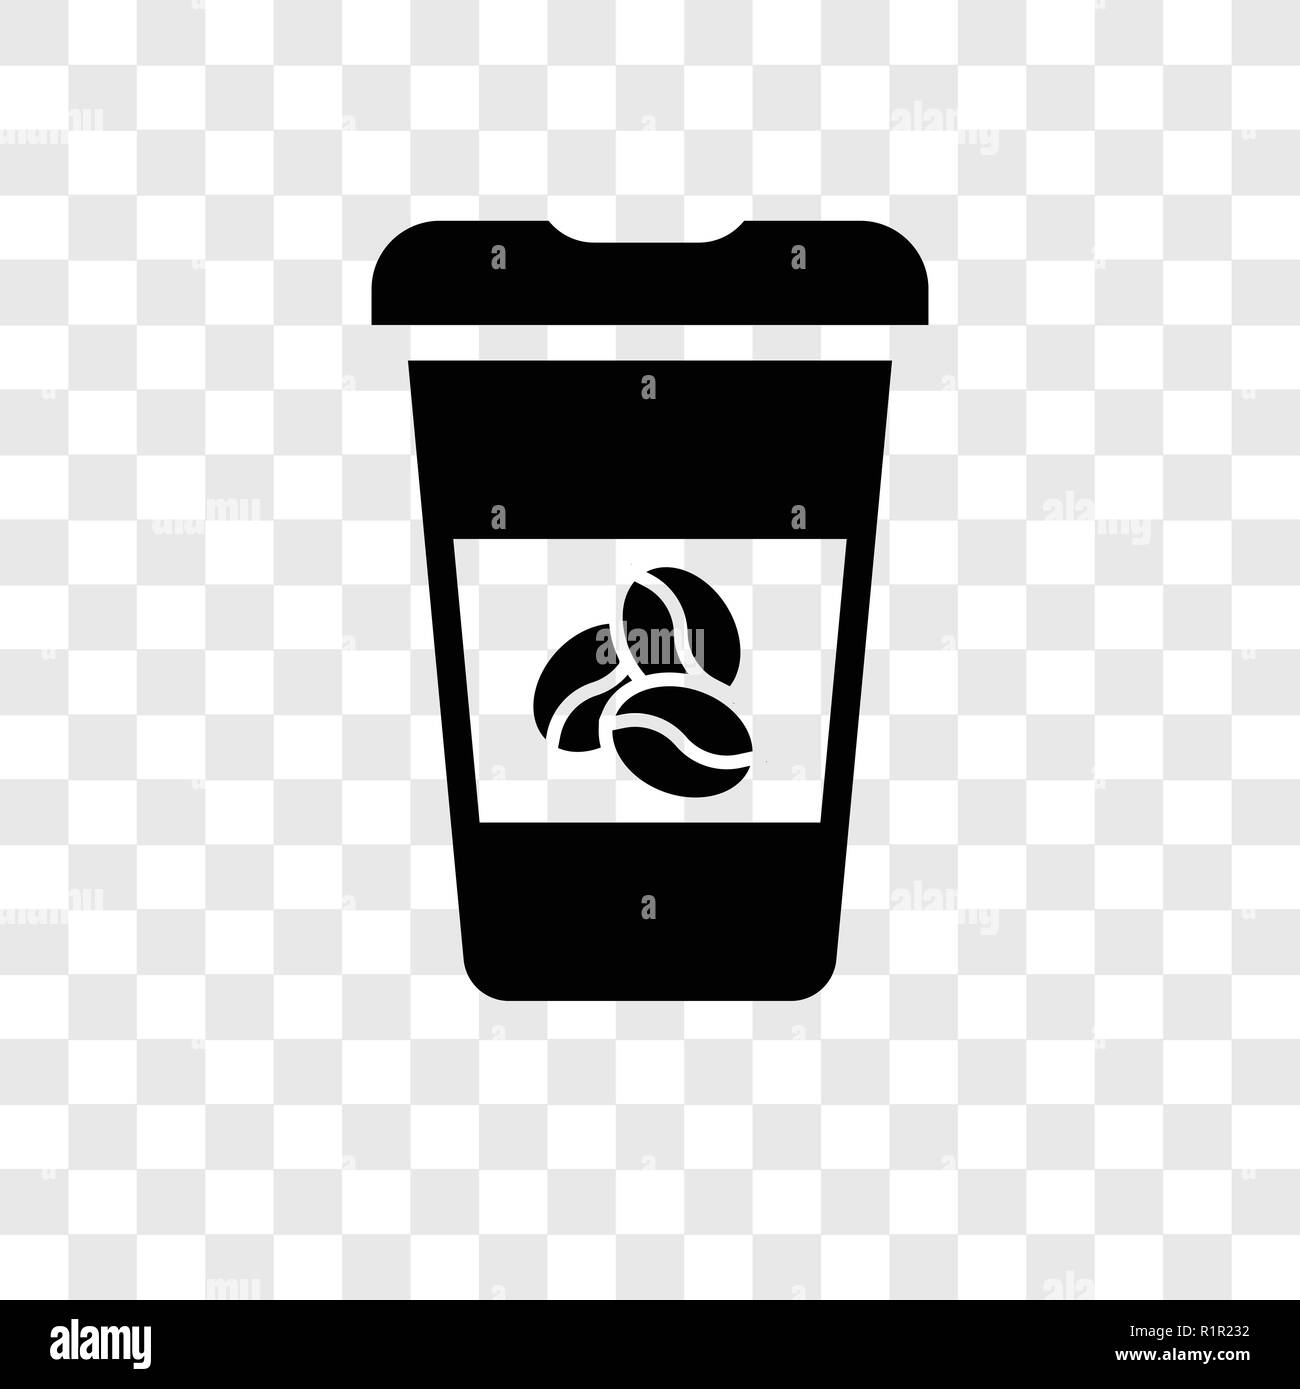 Coffee Cup Vector Icon Isolated on Transparent Background, Linear